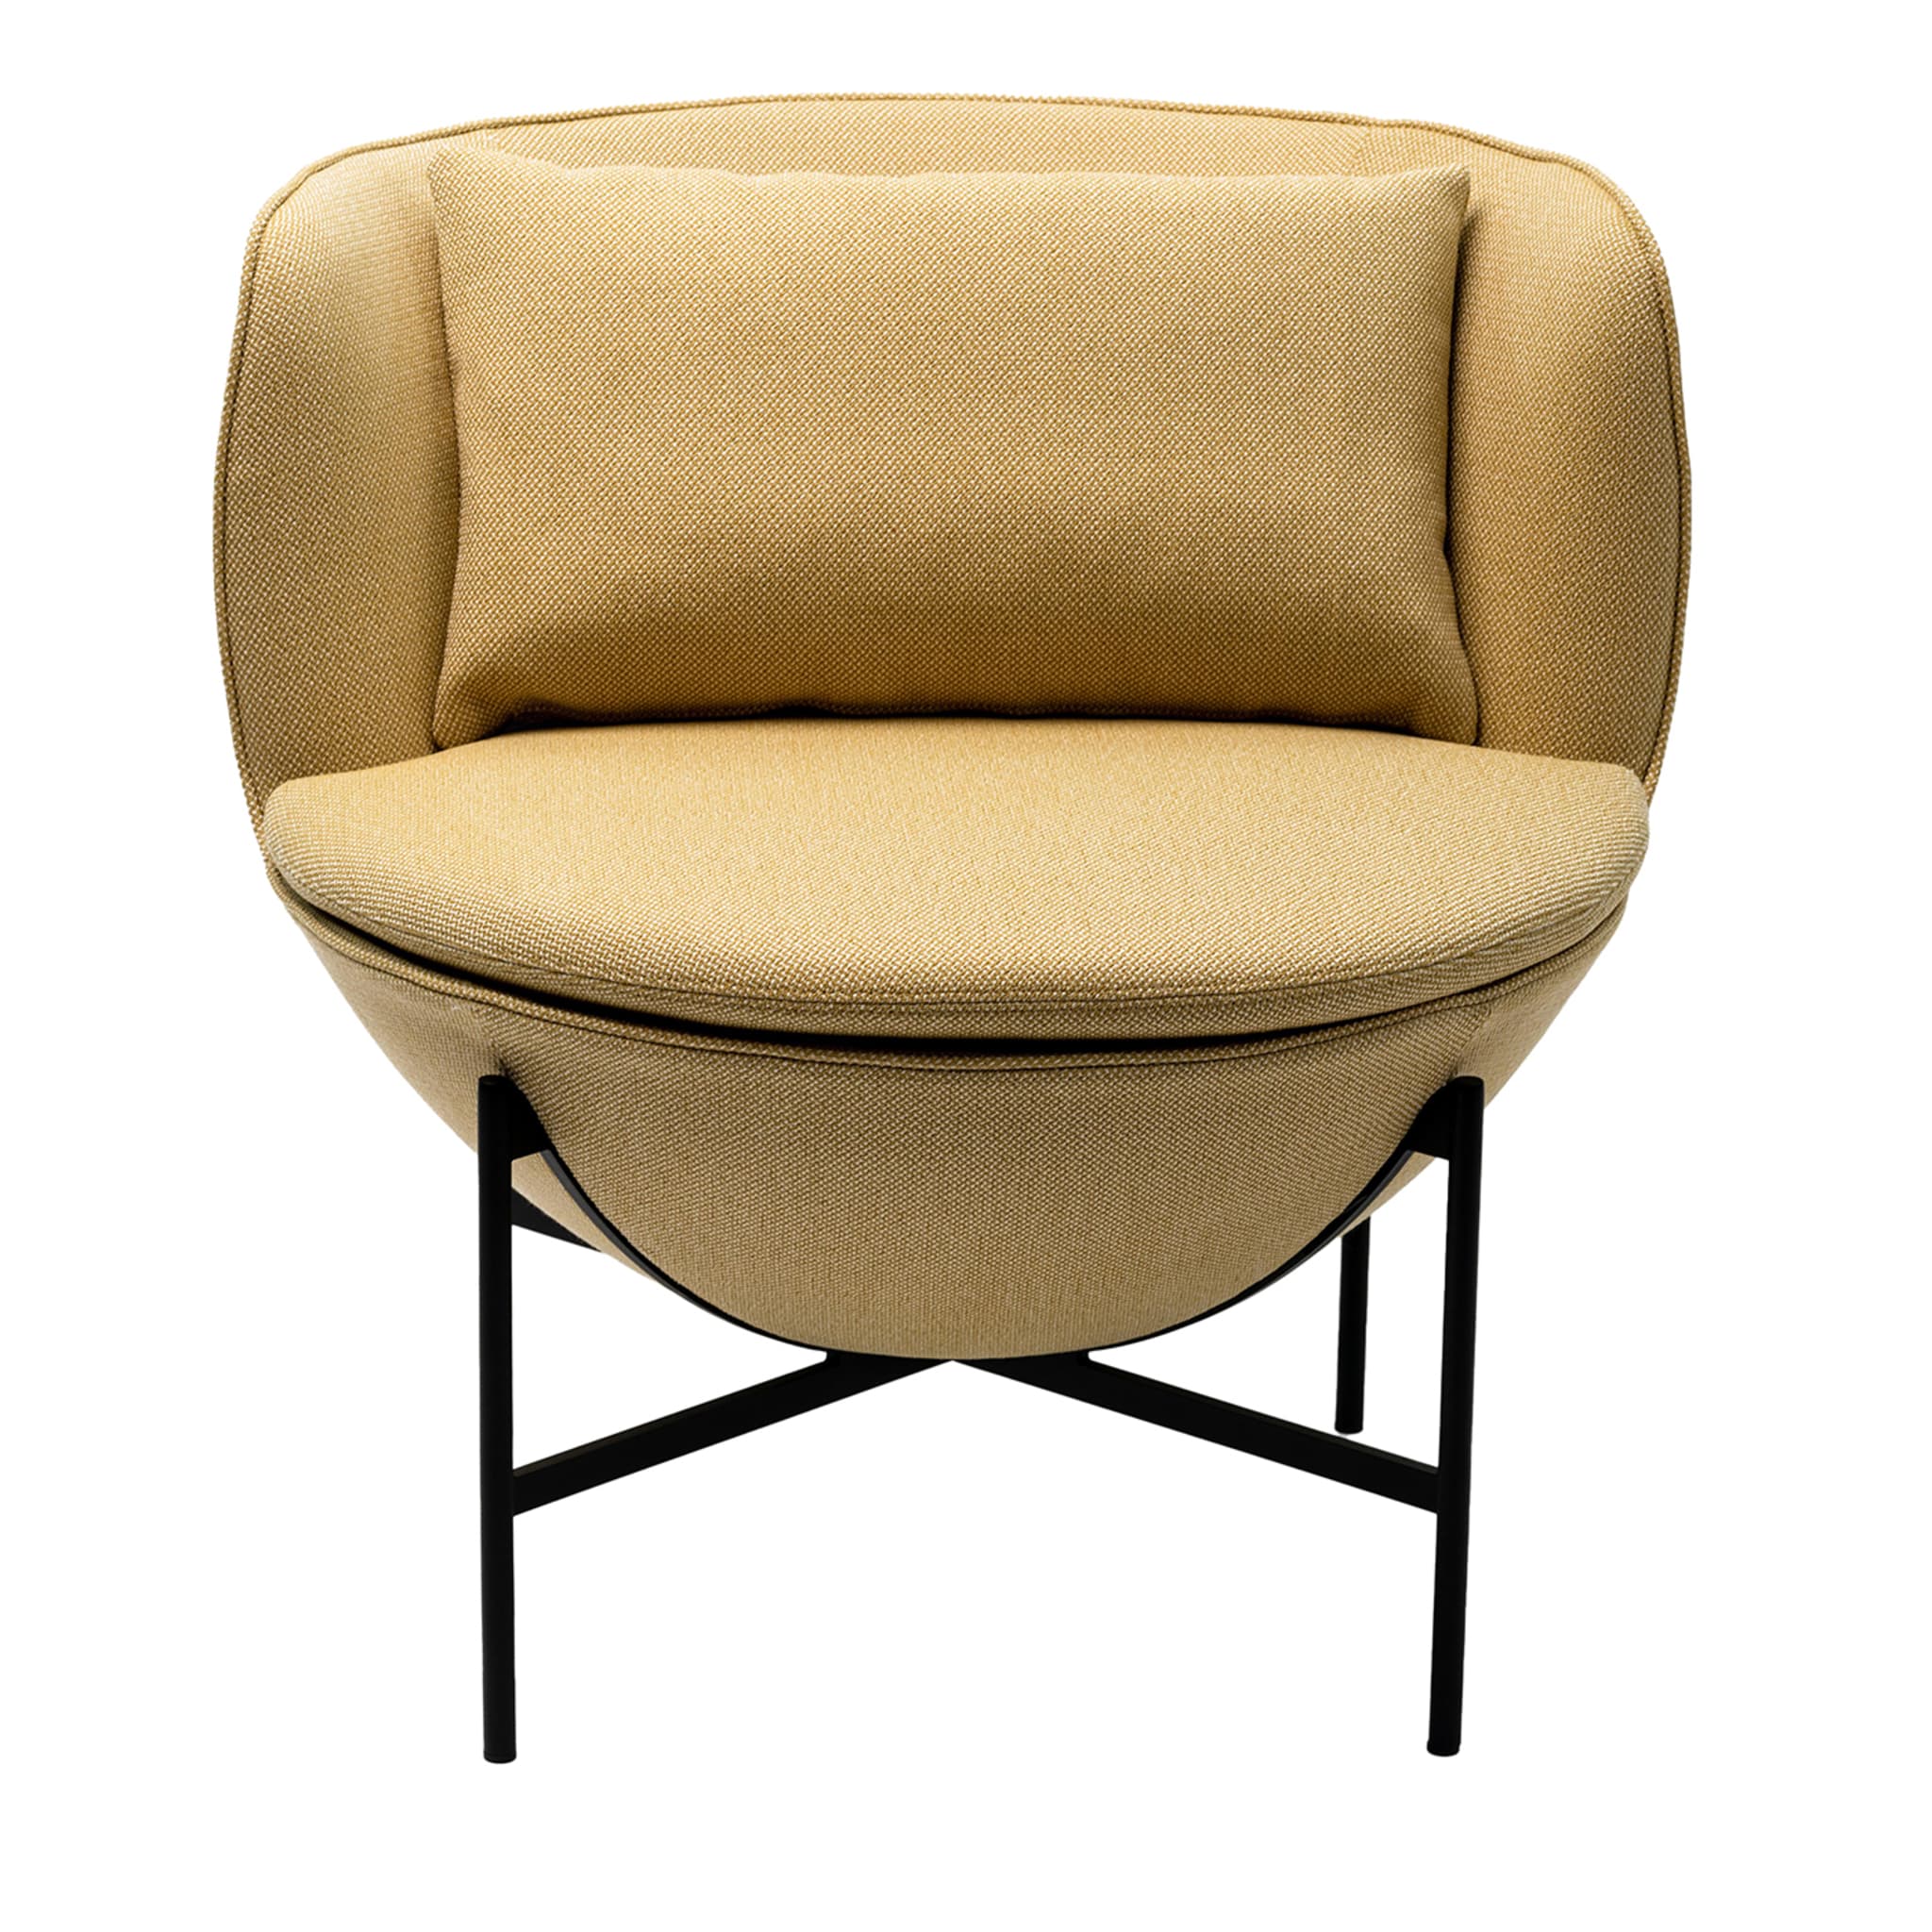 Calice Beige Armchair by Patrick Norguet - Main view